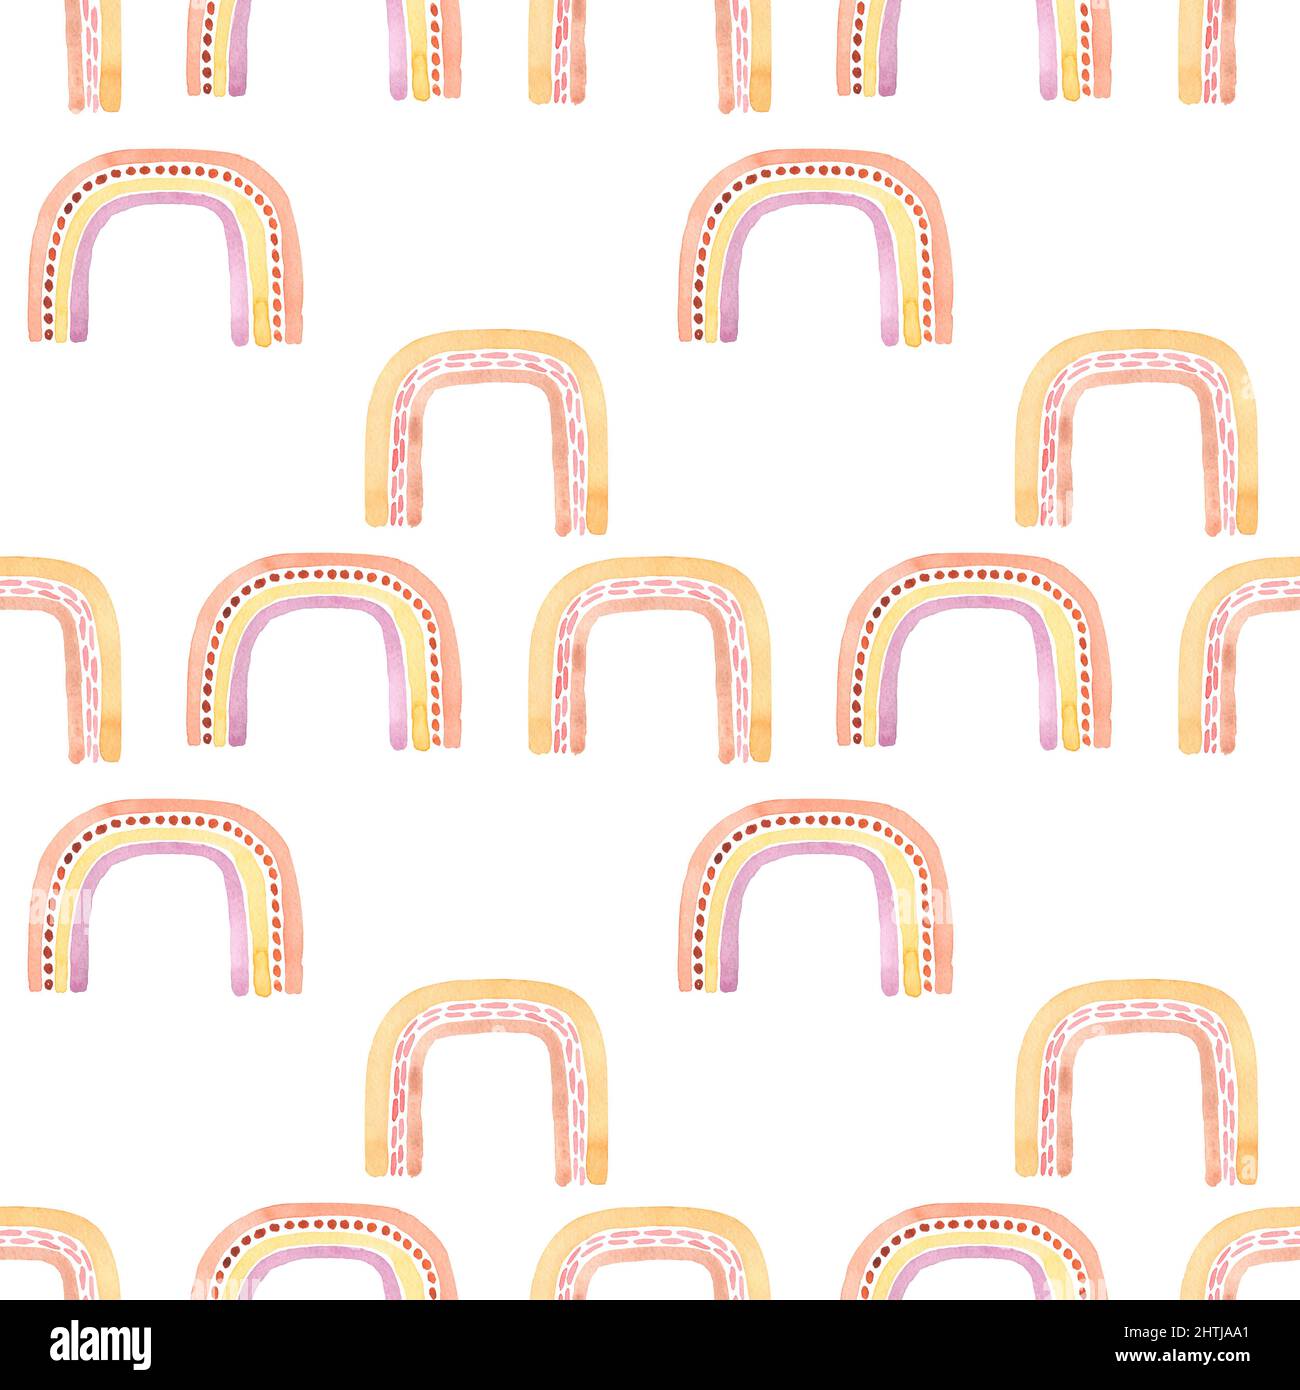 Rainbows Seamless Pattern, Watercolor delicate baby Repeat Paper, Kids Cute print, Children pattern for fabric, Nursery printing design Stock Photo